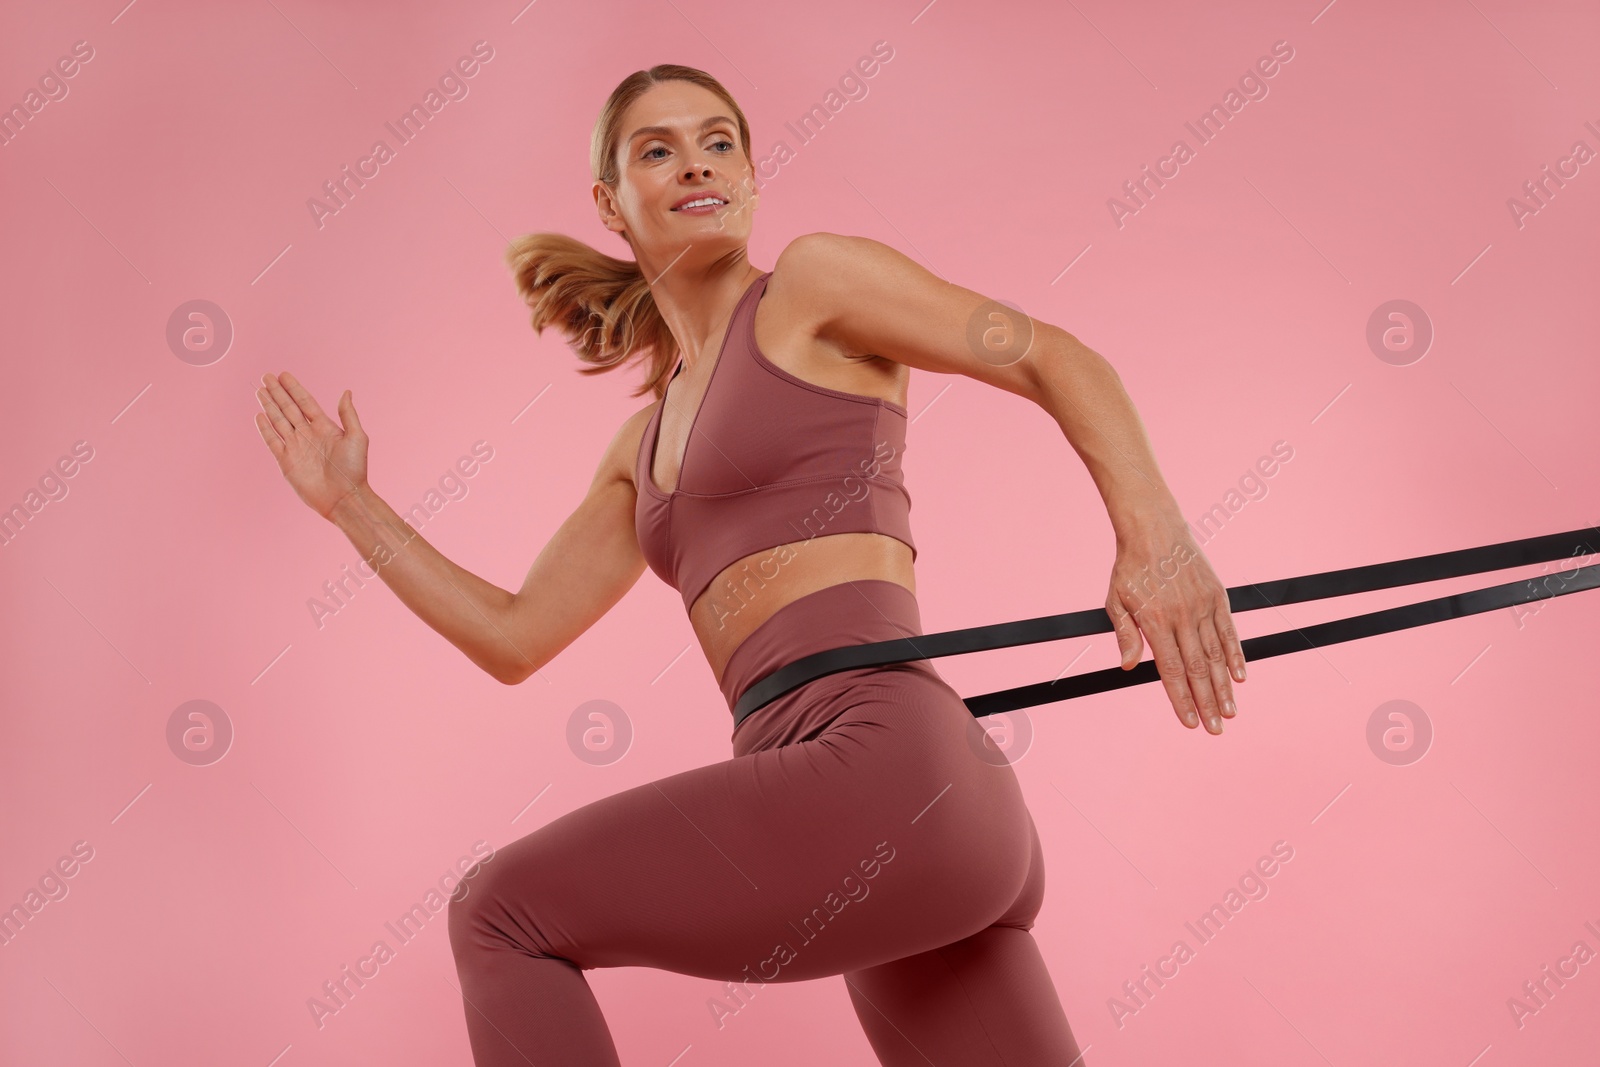 Photo of Woman exercising with elastic resistance band on pink background, low angle view